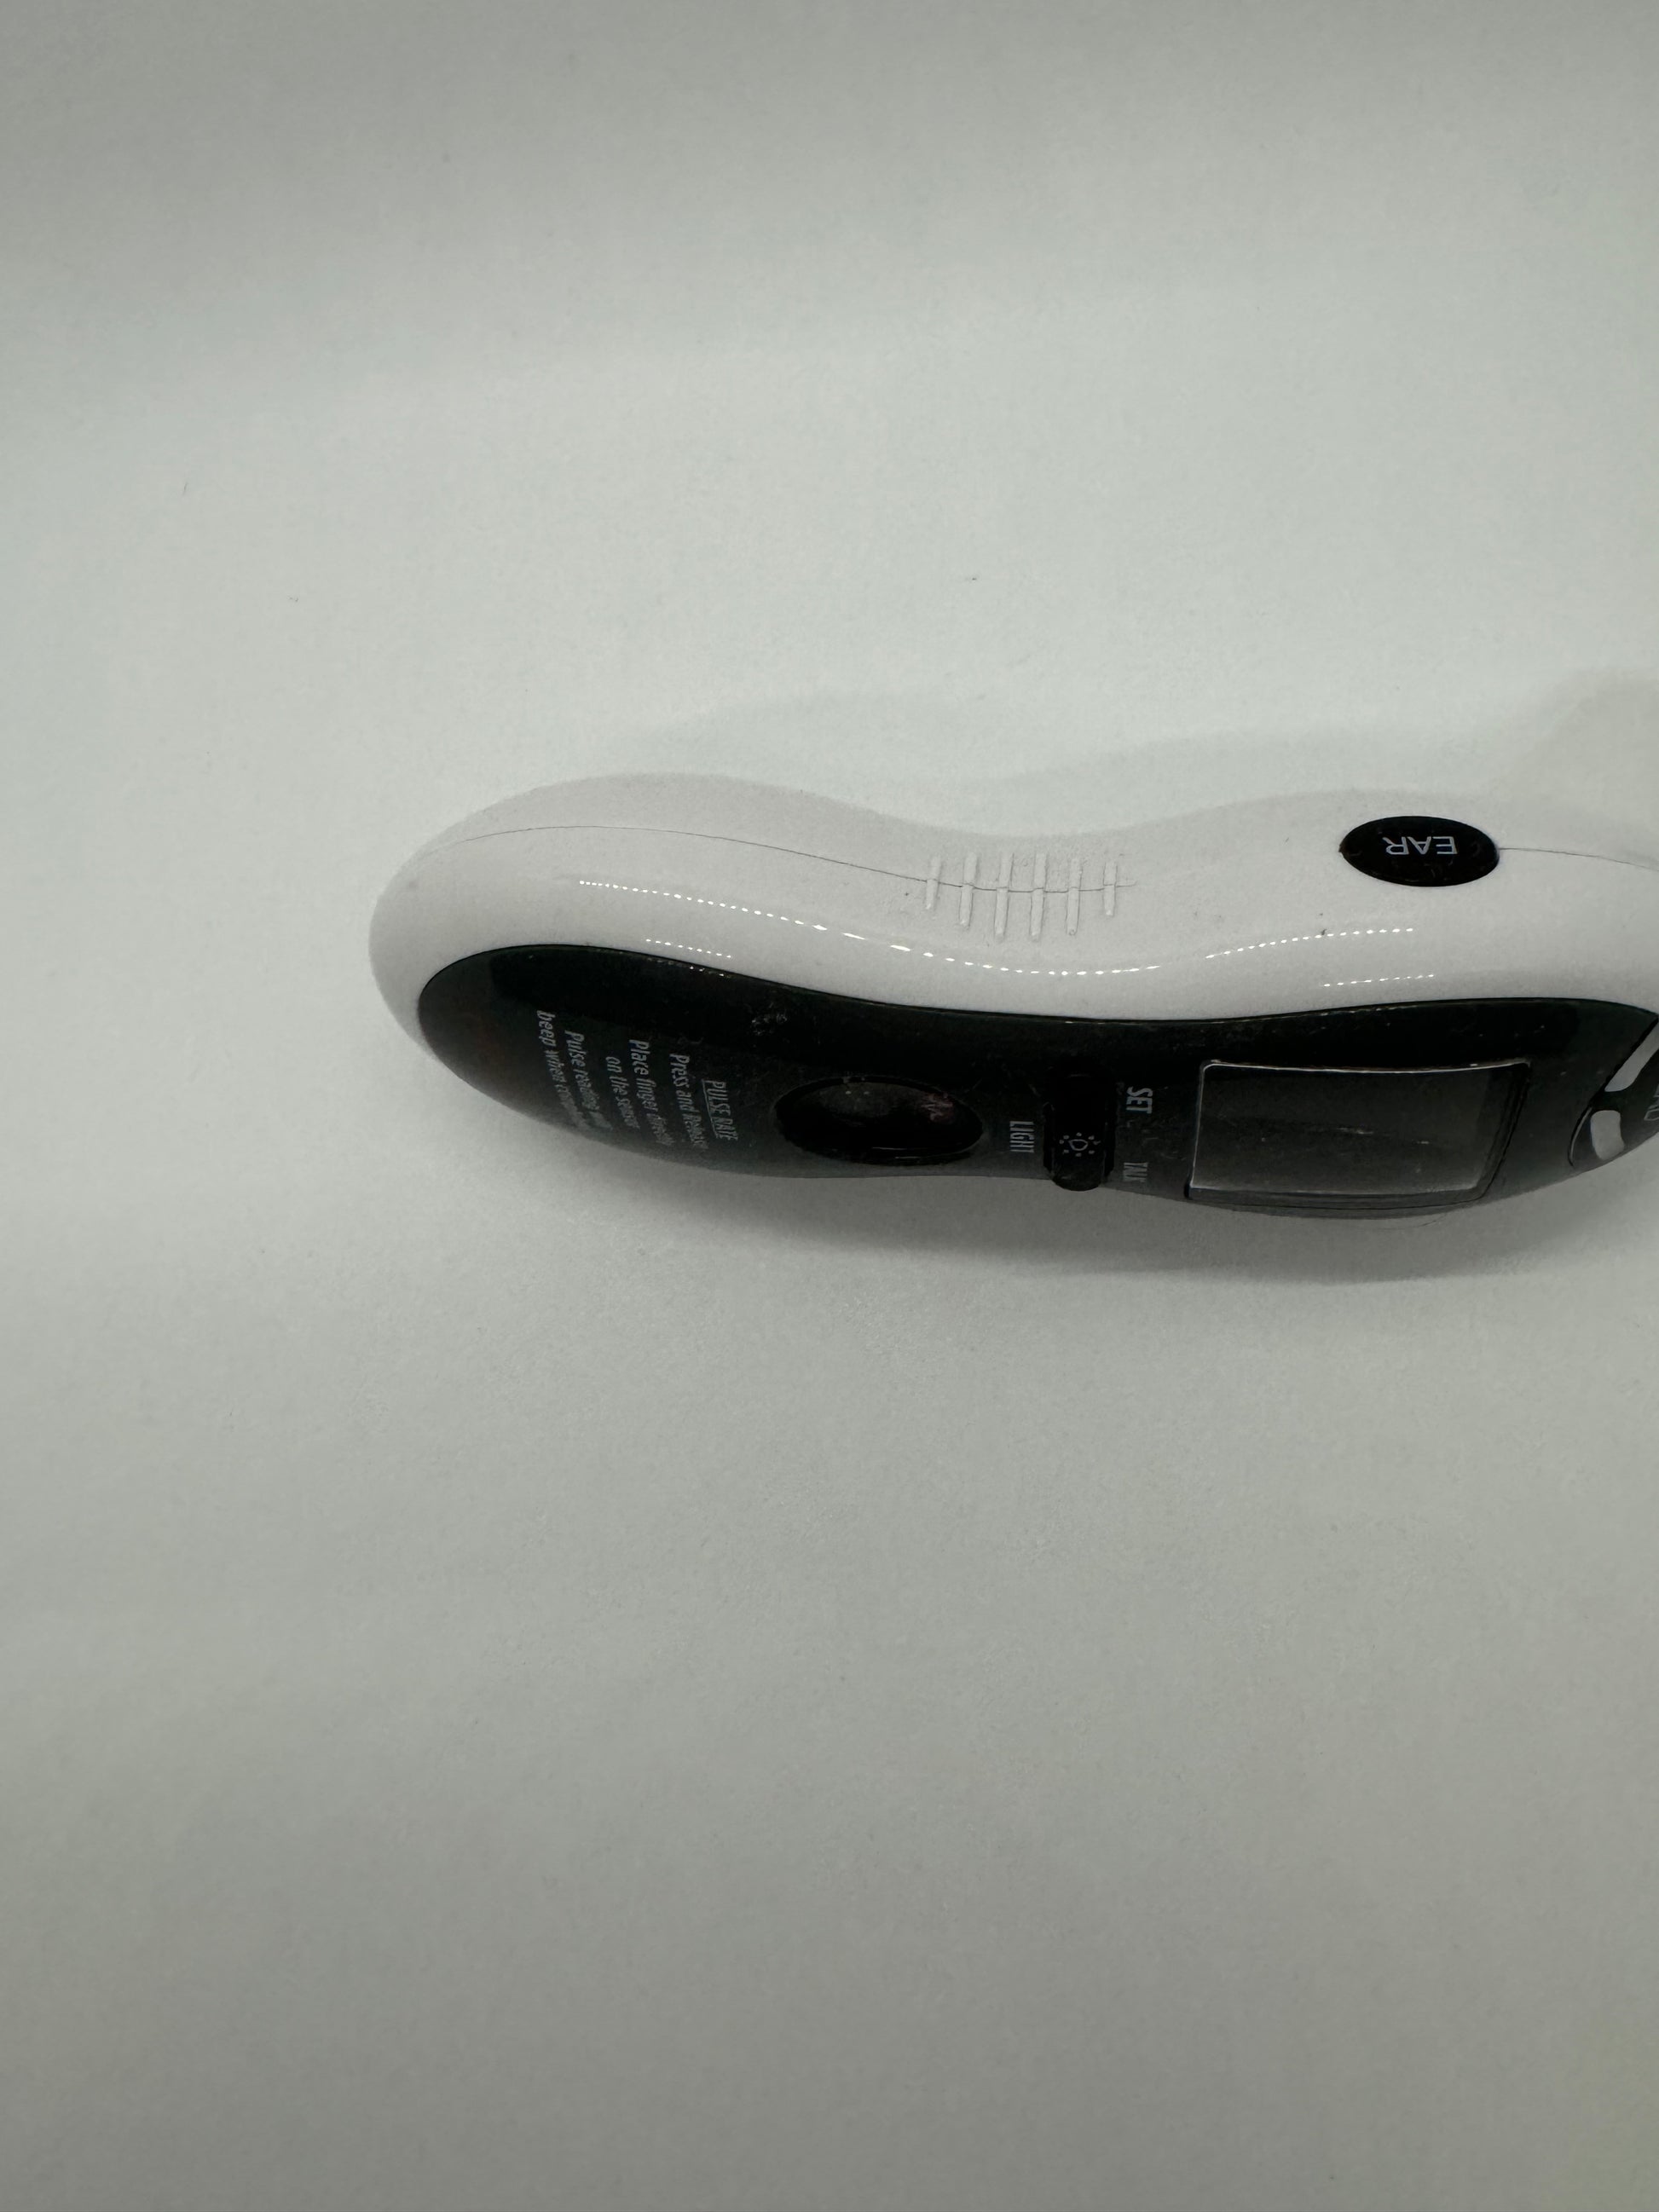 The picture shows a white object on a plain white background. The object appears to be a small electronic device, possibly a remote control or a handheld scanner. It has an ergonomic design with a curved shape to fit comfortably in the hand. The top part of the device is white with a textured grip and a small black circular button with the letters "EVA" on it. The bottom part of the device is black with some text, but it's not fully visible in the picture.